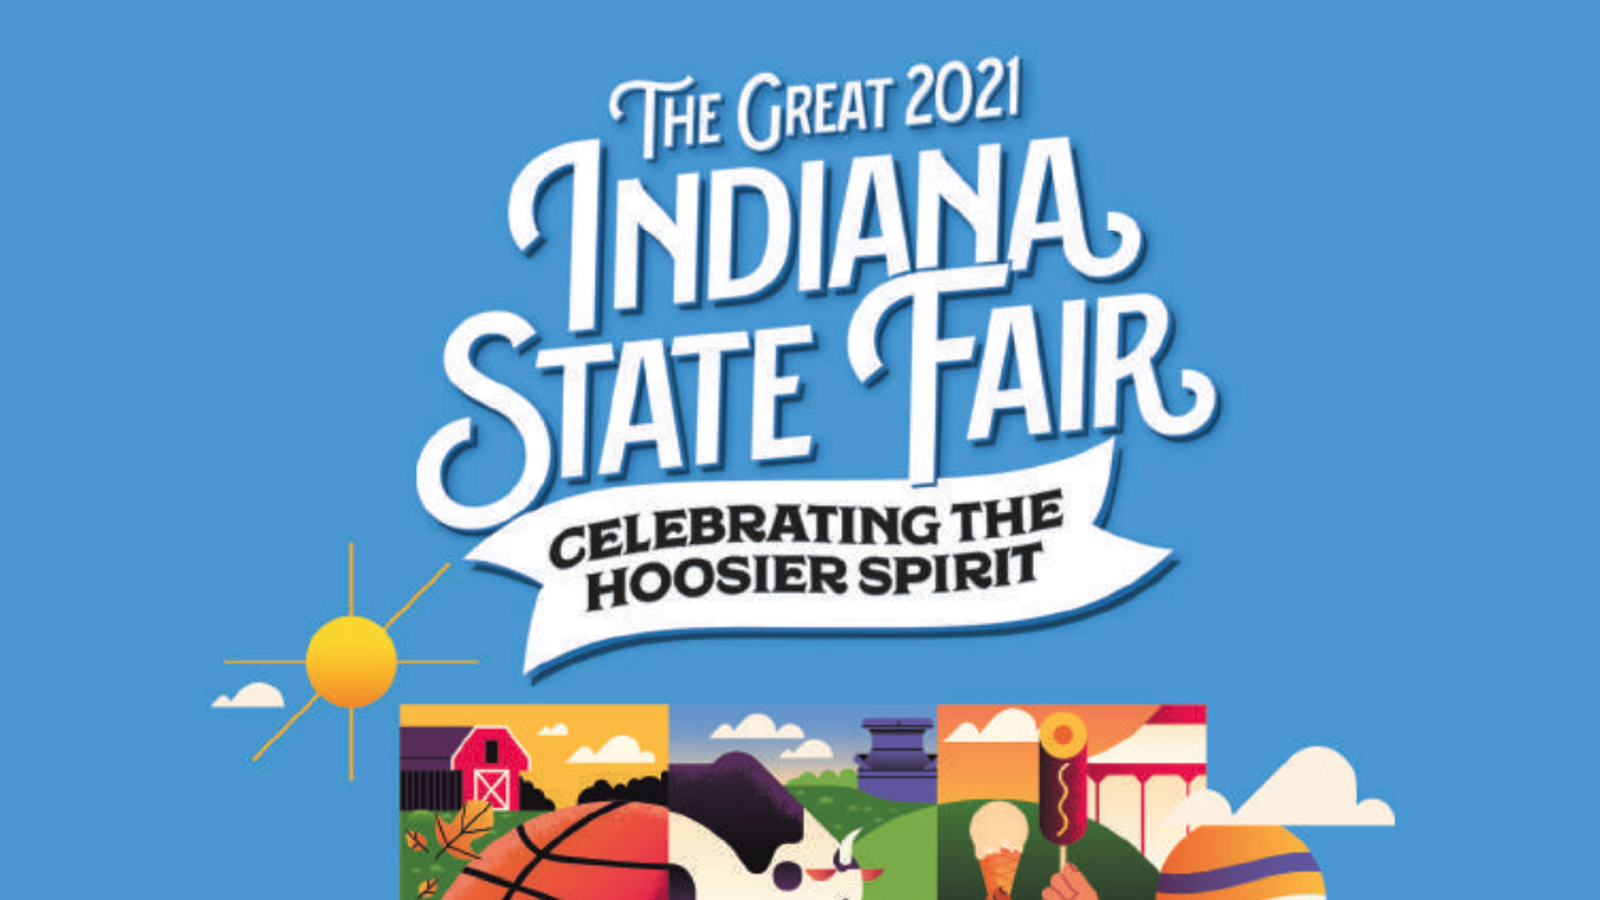 Plan Your Trip to the 2021 Indiana State Fair WTCA